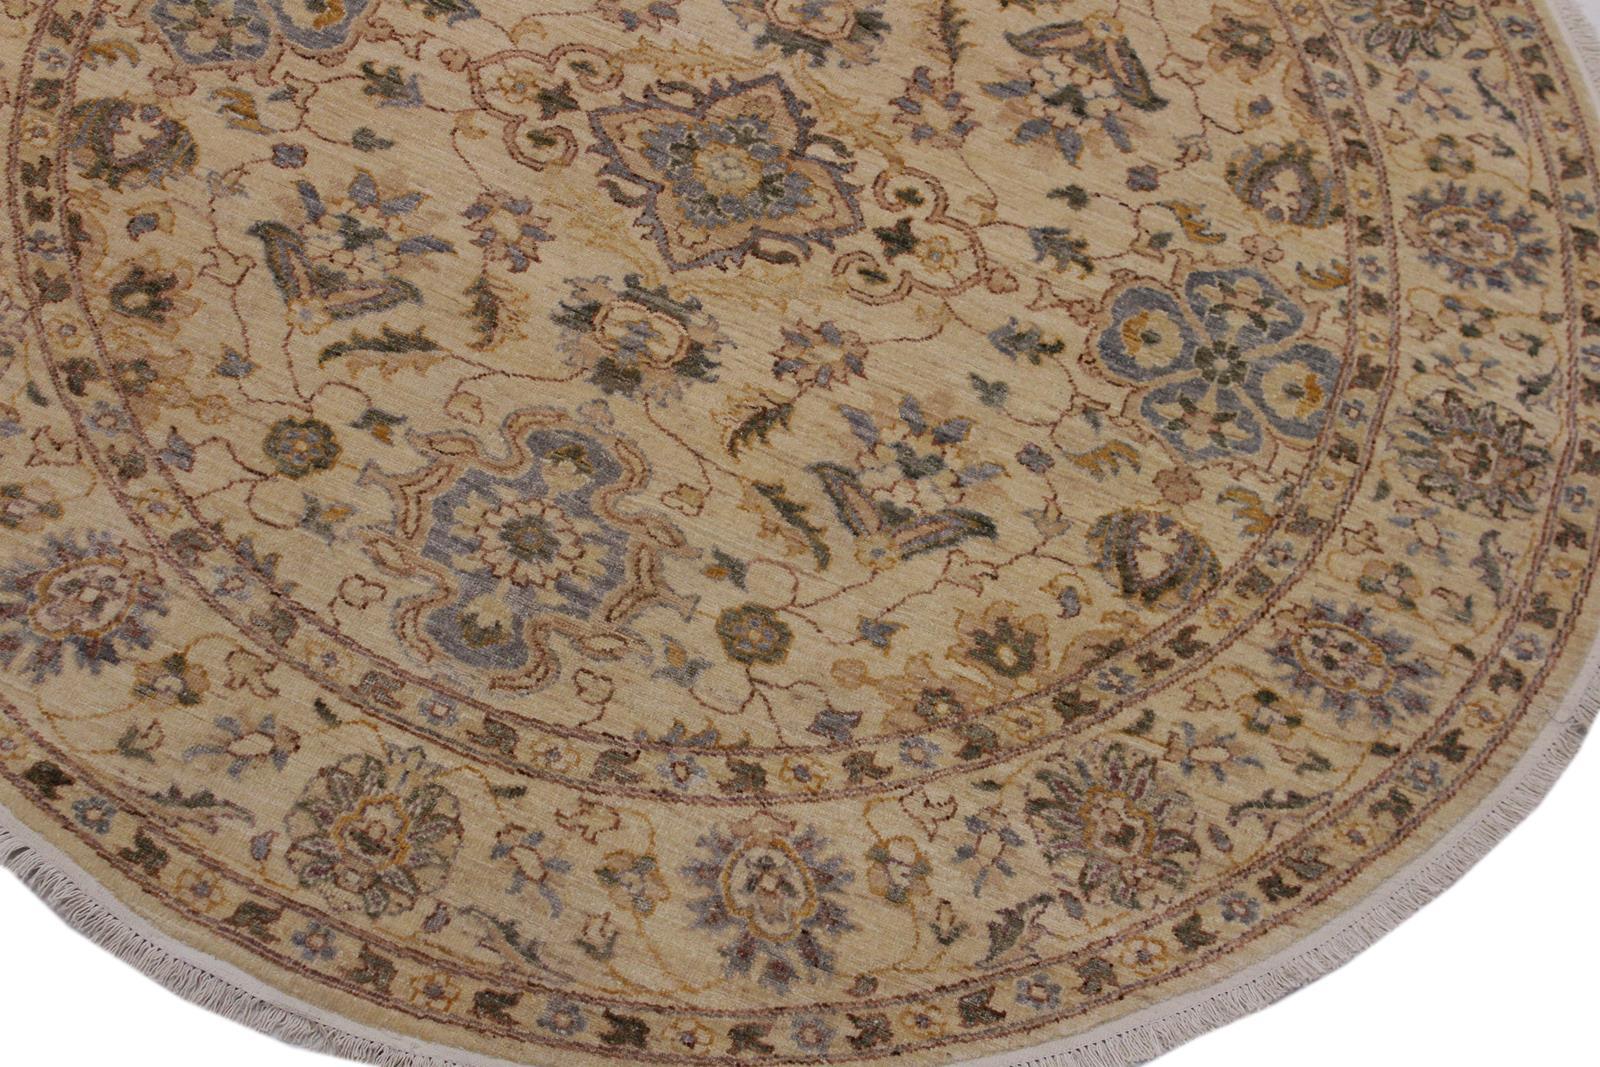 A11762 6 6"x 6 7"Traditional                   7x7NaturalBROWNHand-knotted                  Pakistan   100% Wool  Round      652671215049